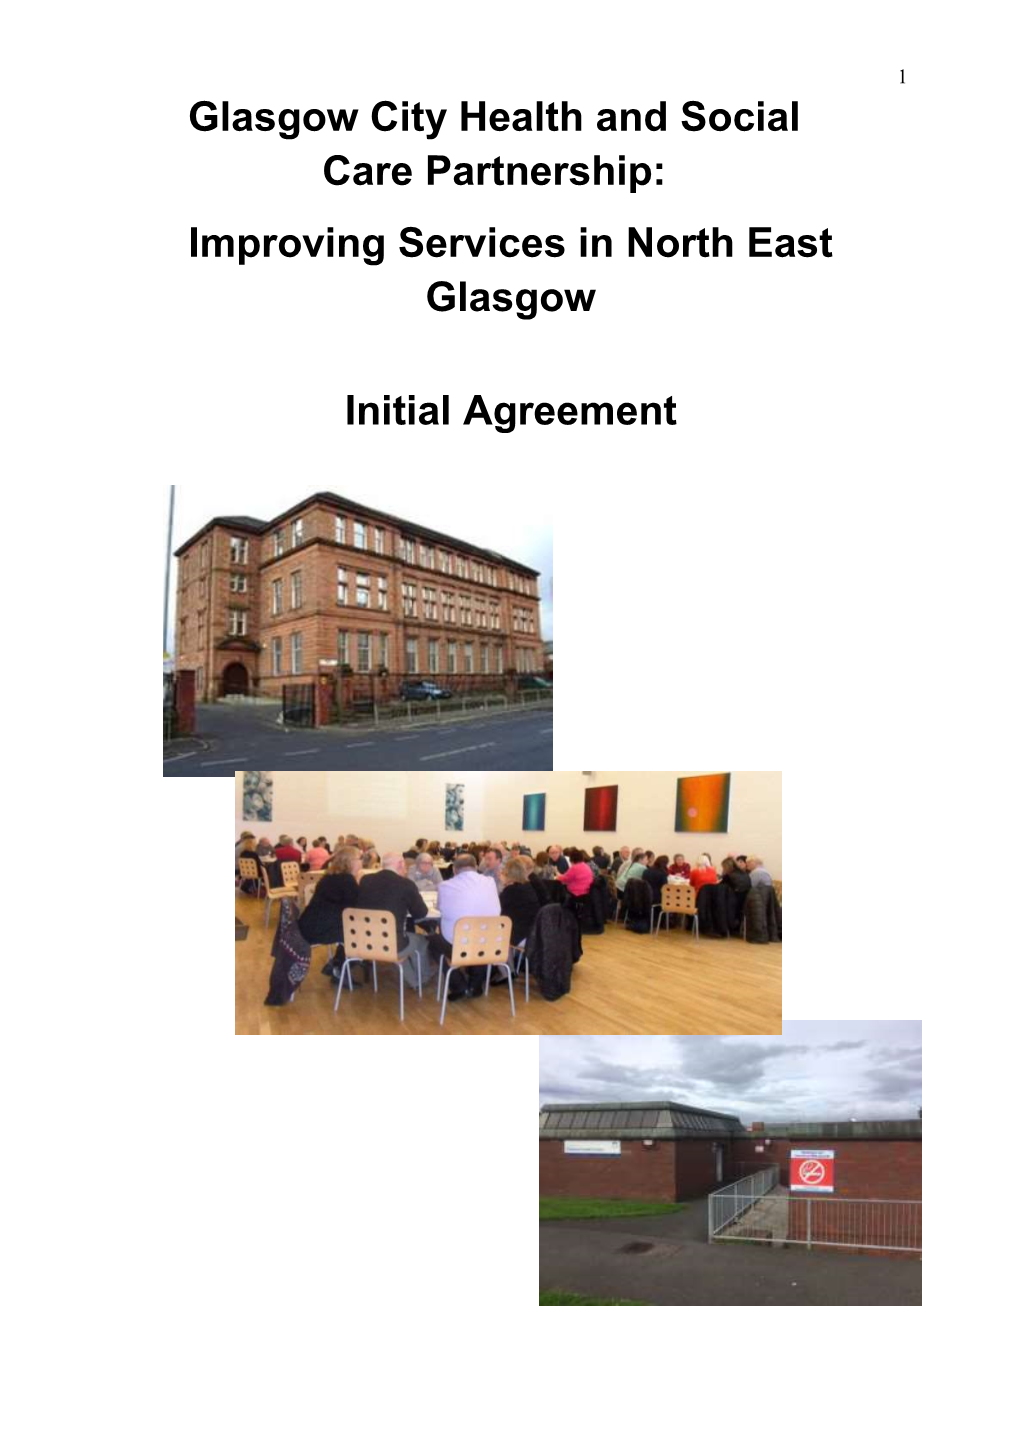 Glasgow City Health and Social Care Partnership: Improving Services in North East Glasgow Initial Agreement